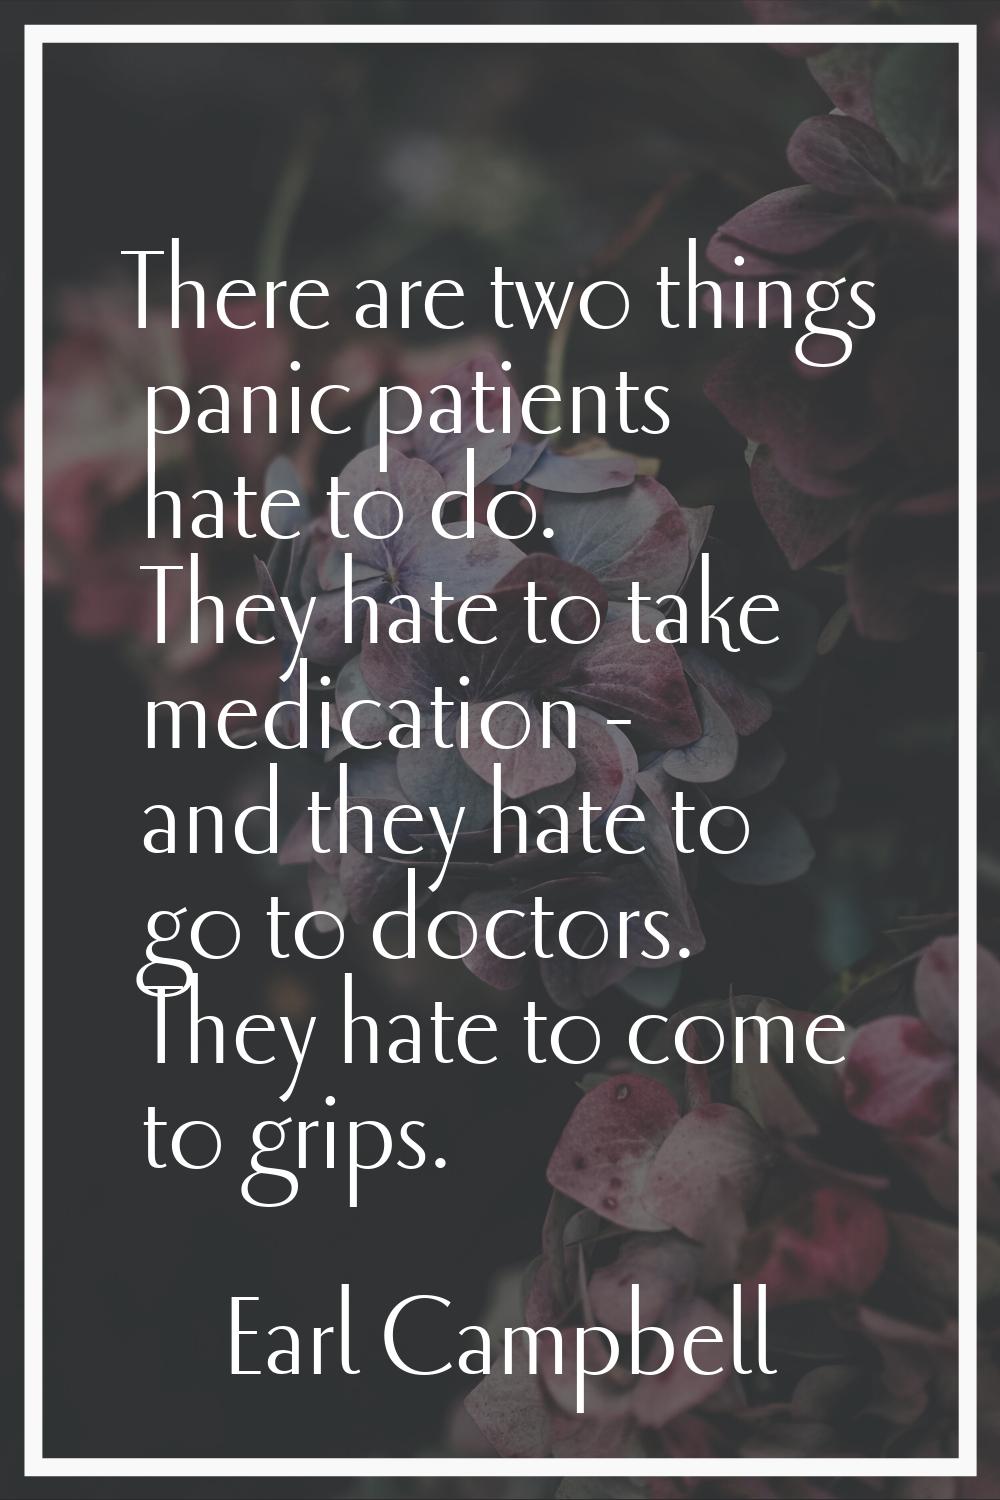 There are two things panic patients hate to do. They hate to take medication - and they hate to go 